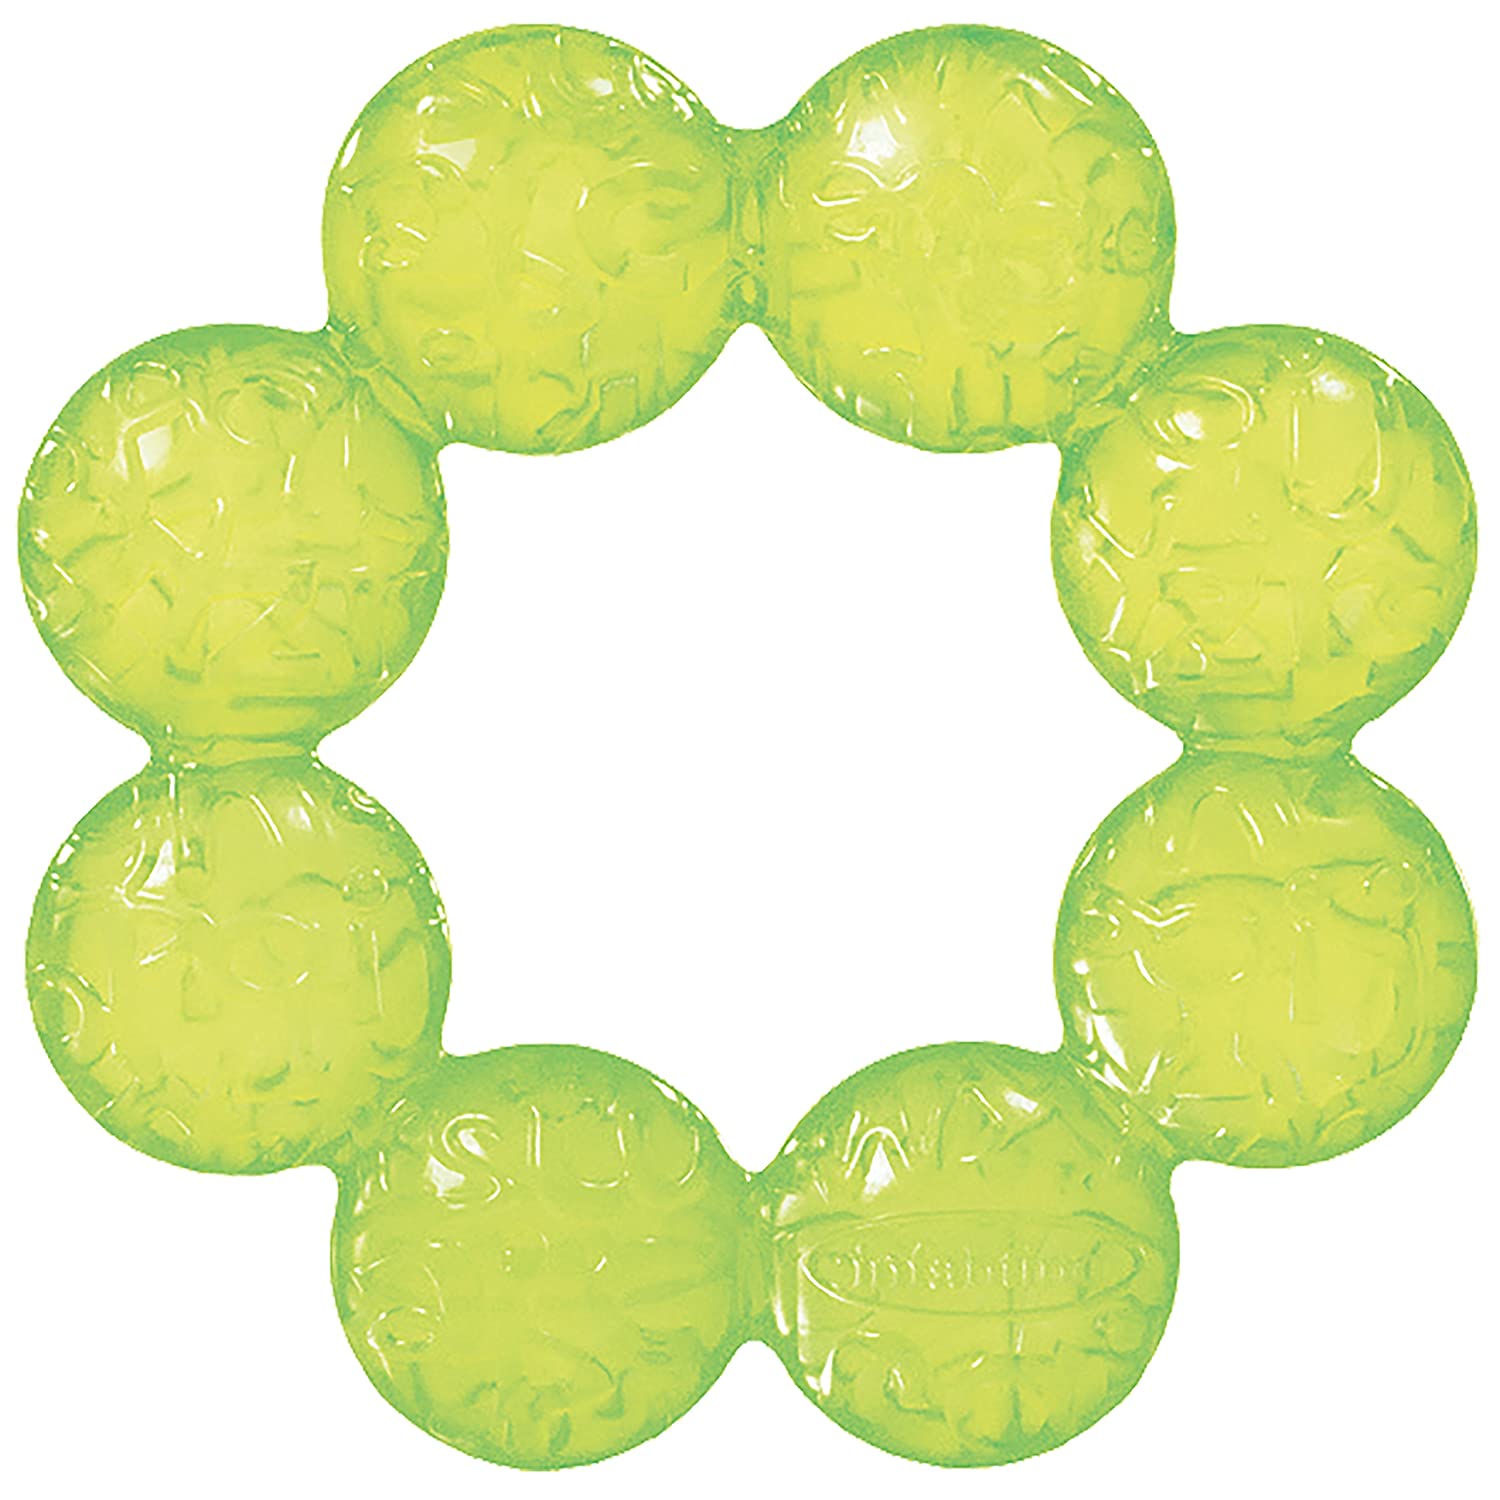 Infantino 3-Pack Water Teethers , Blue and Green , 7 x 2.25 x 8 Inch (Pack of 3)